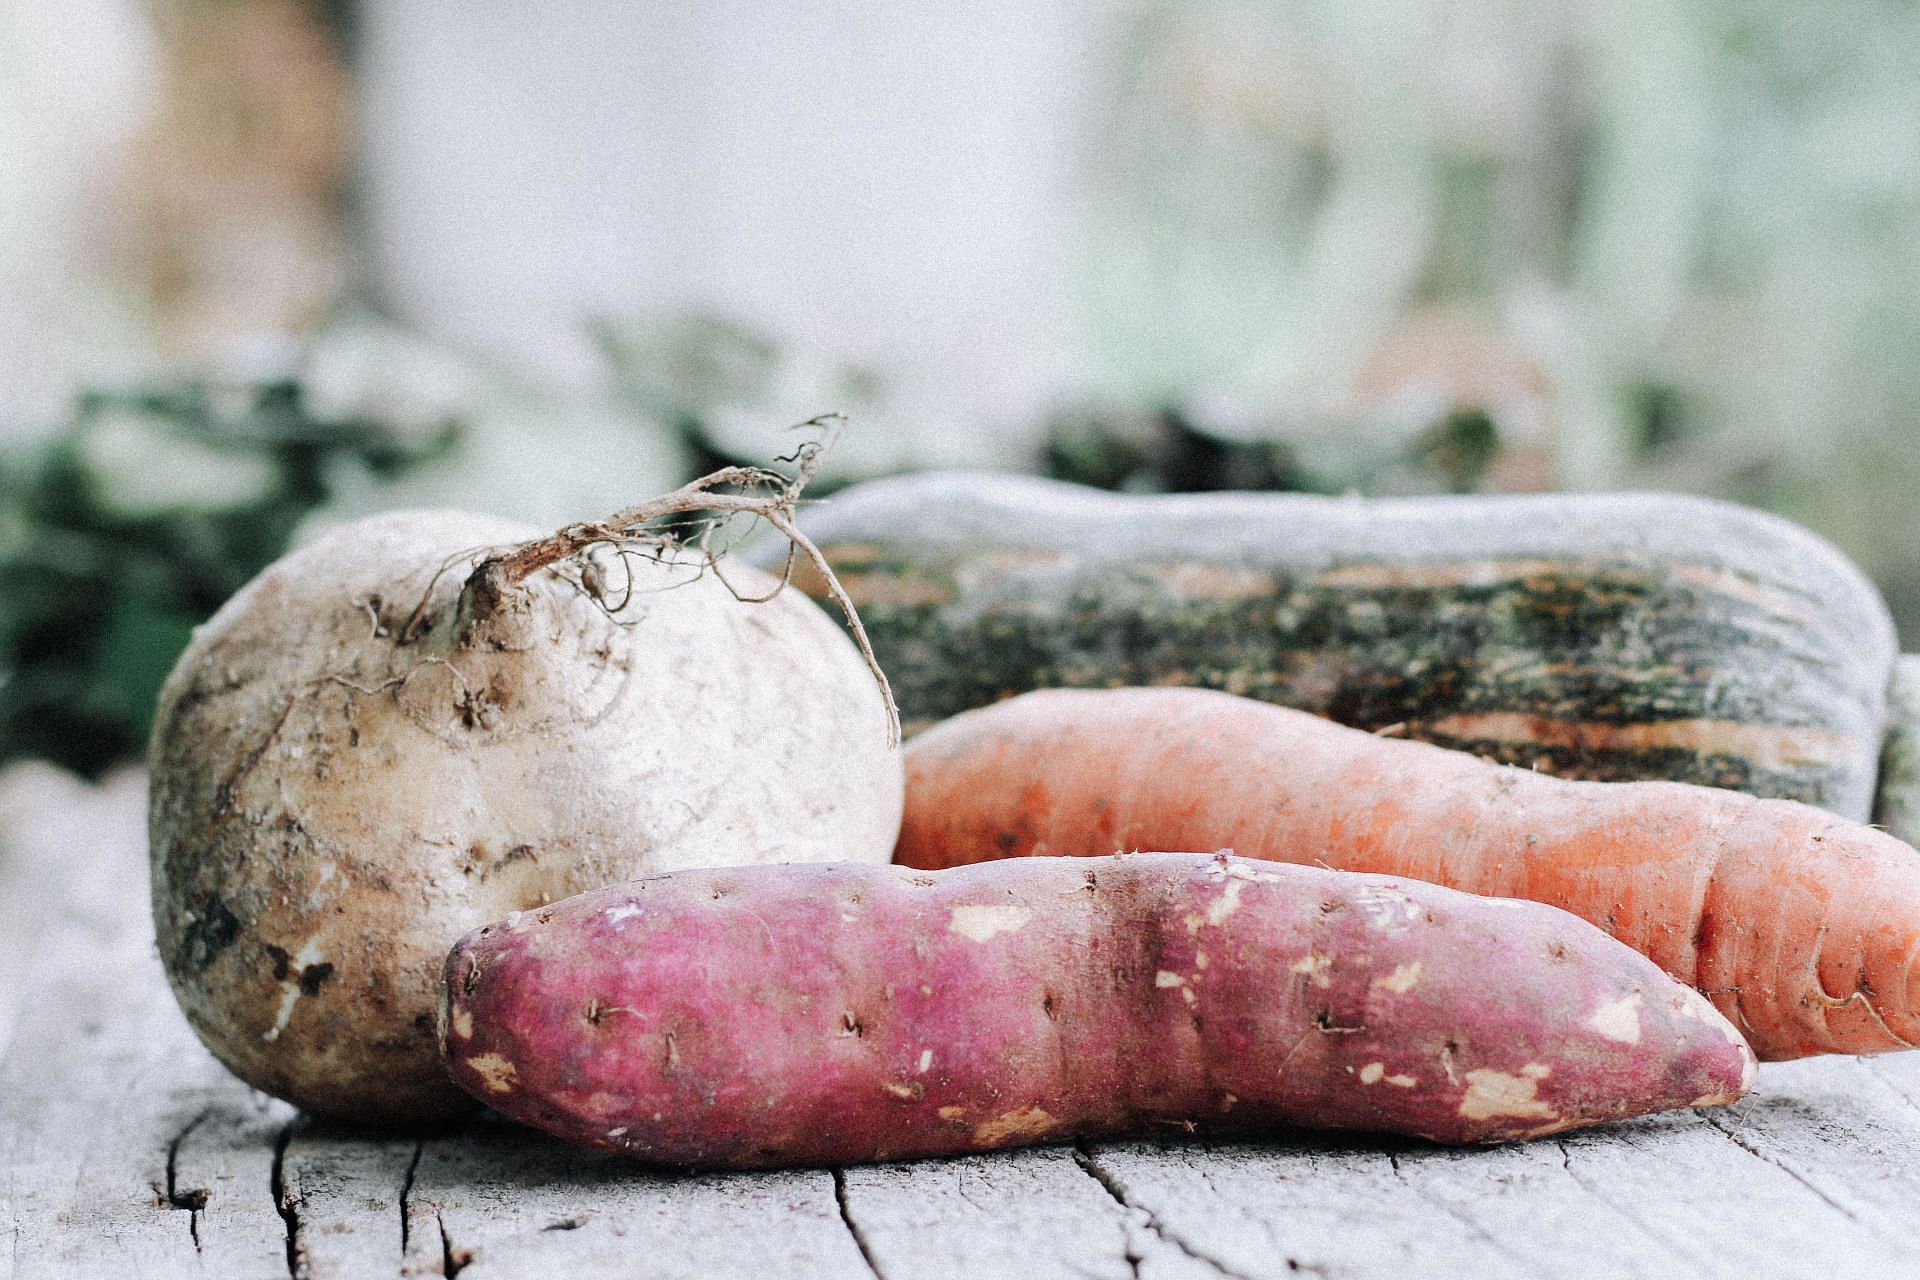 Jicama is a root vegetable with a diverse nutritional profile and several health advantages. (Image via Unsplash/Nguyen Dang Hoang Nhu)